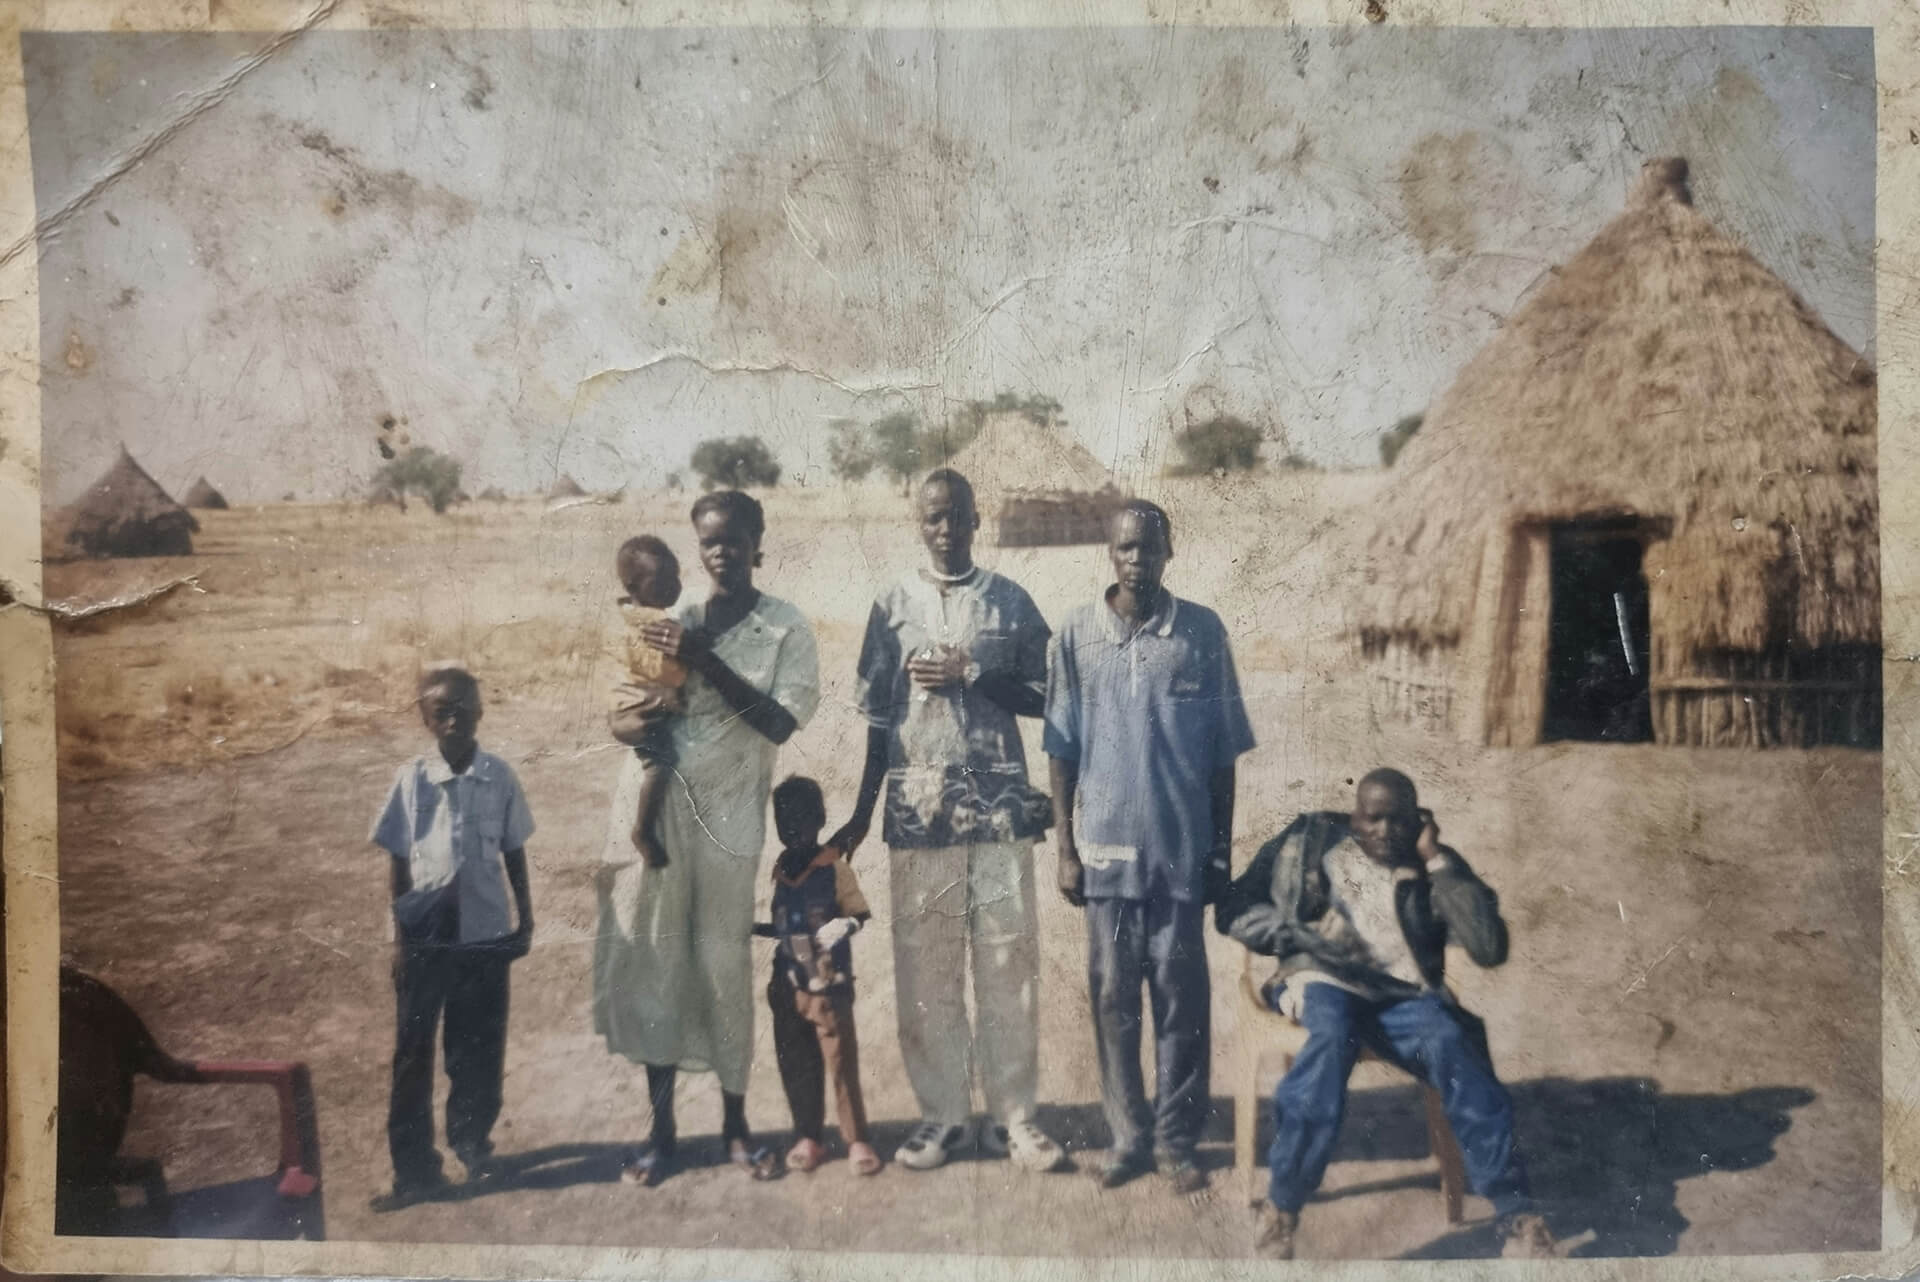 Nyakuoy's lived in several villages and refugee camps after escaping the civil war in Sudan.